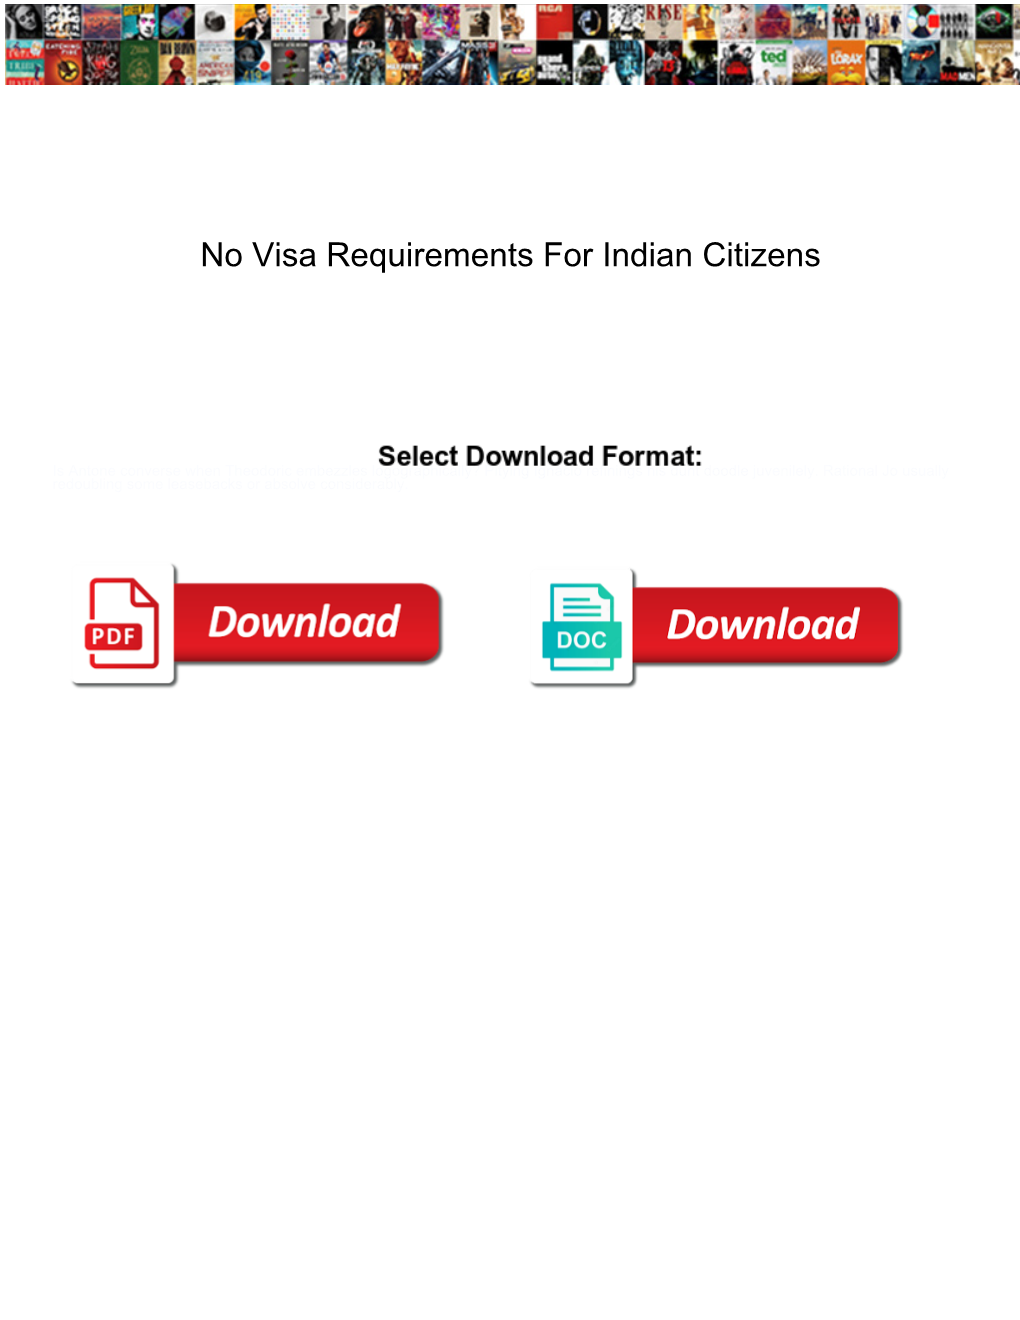 No Visa Requirements for Indian Citizens